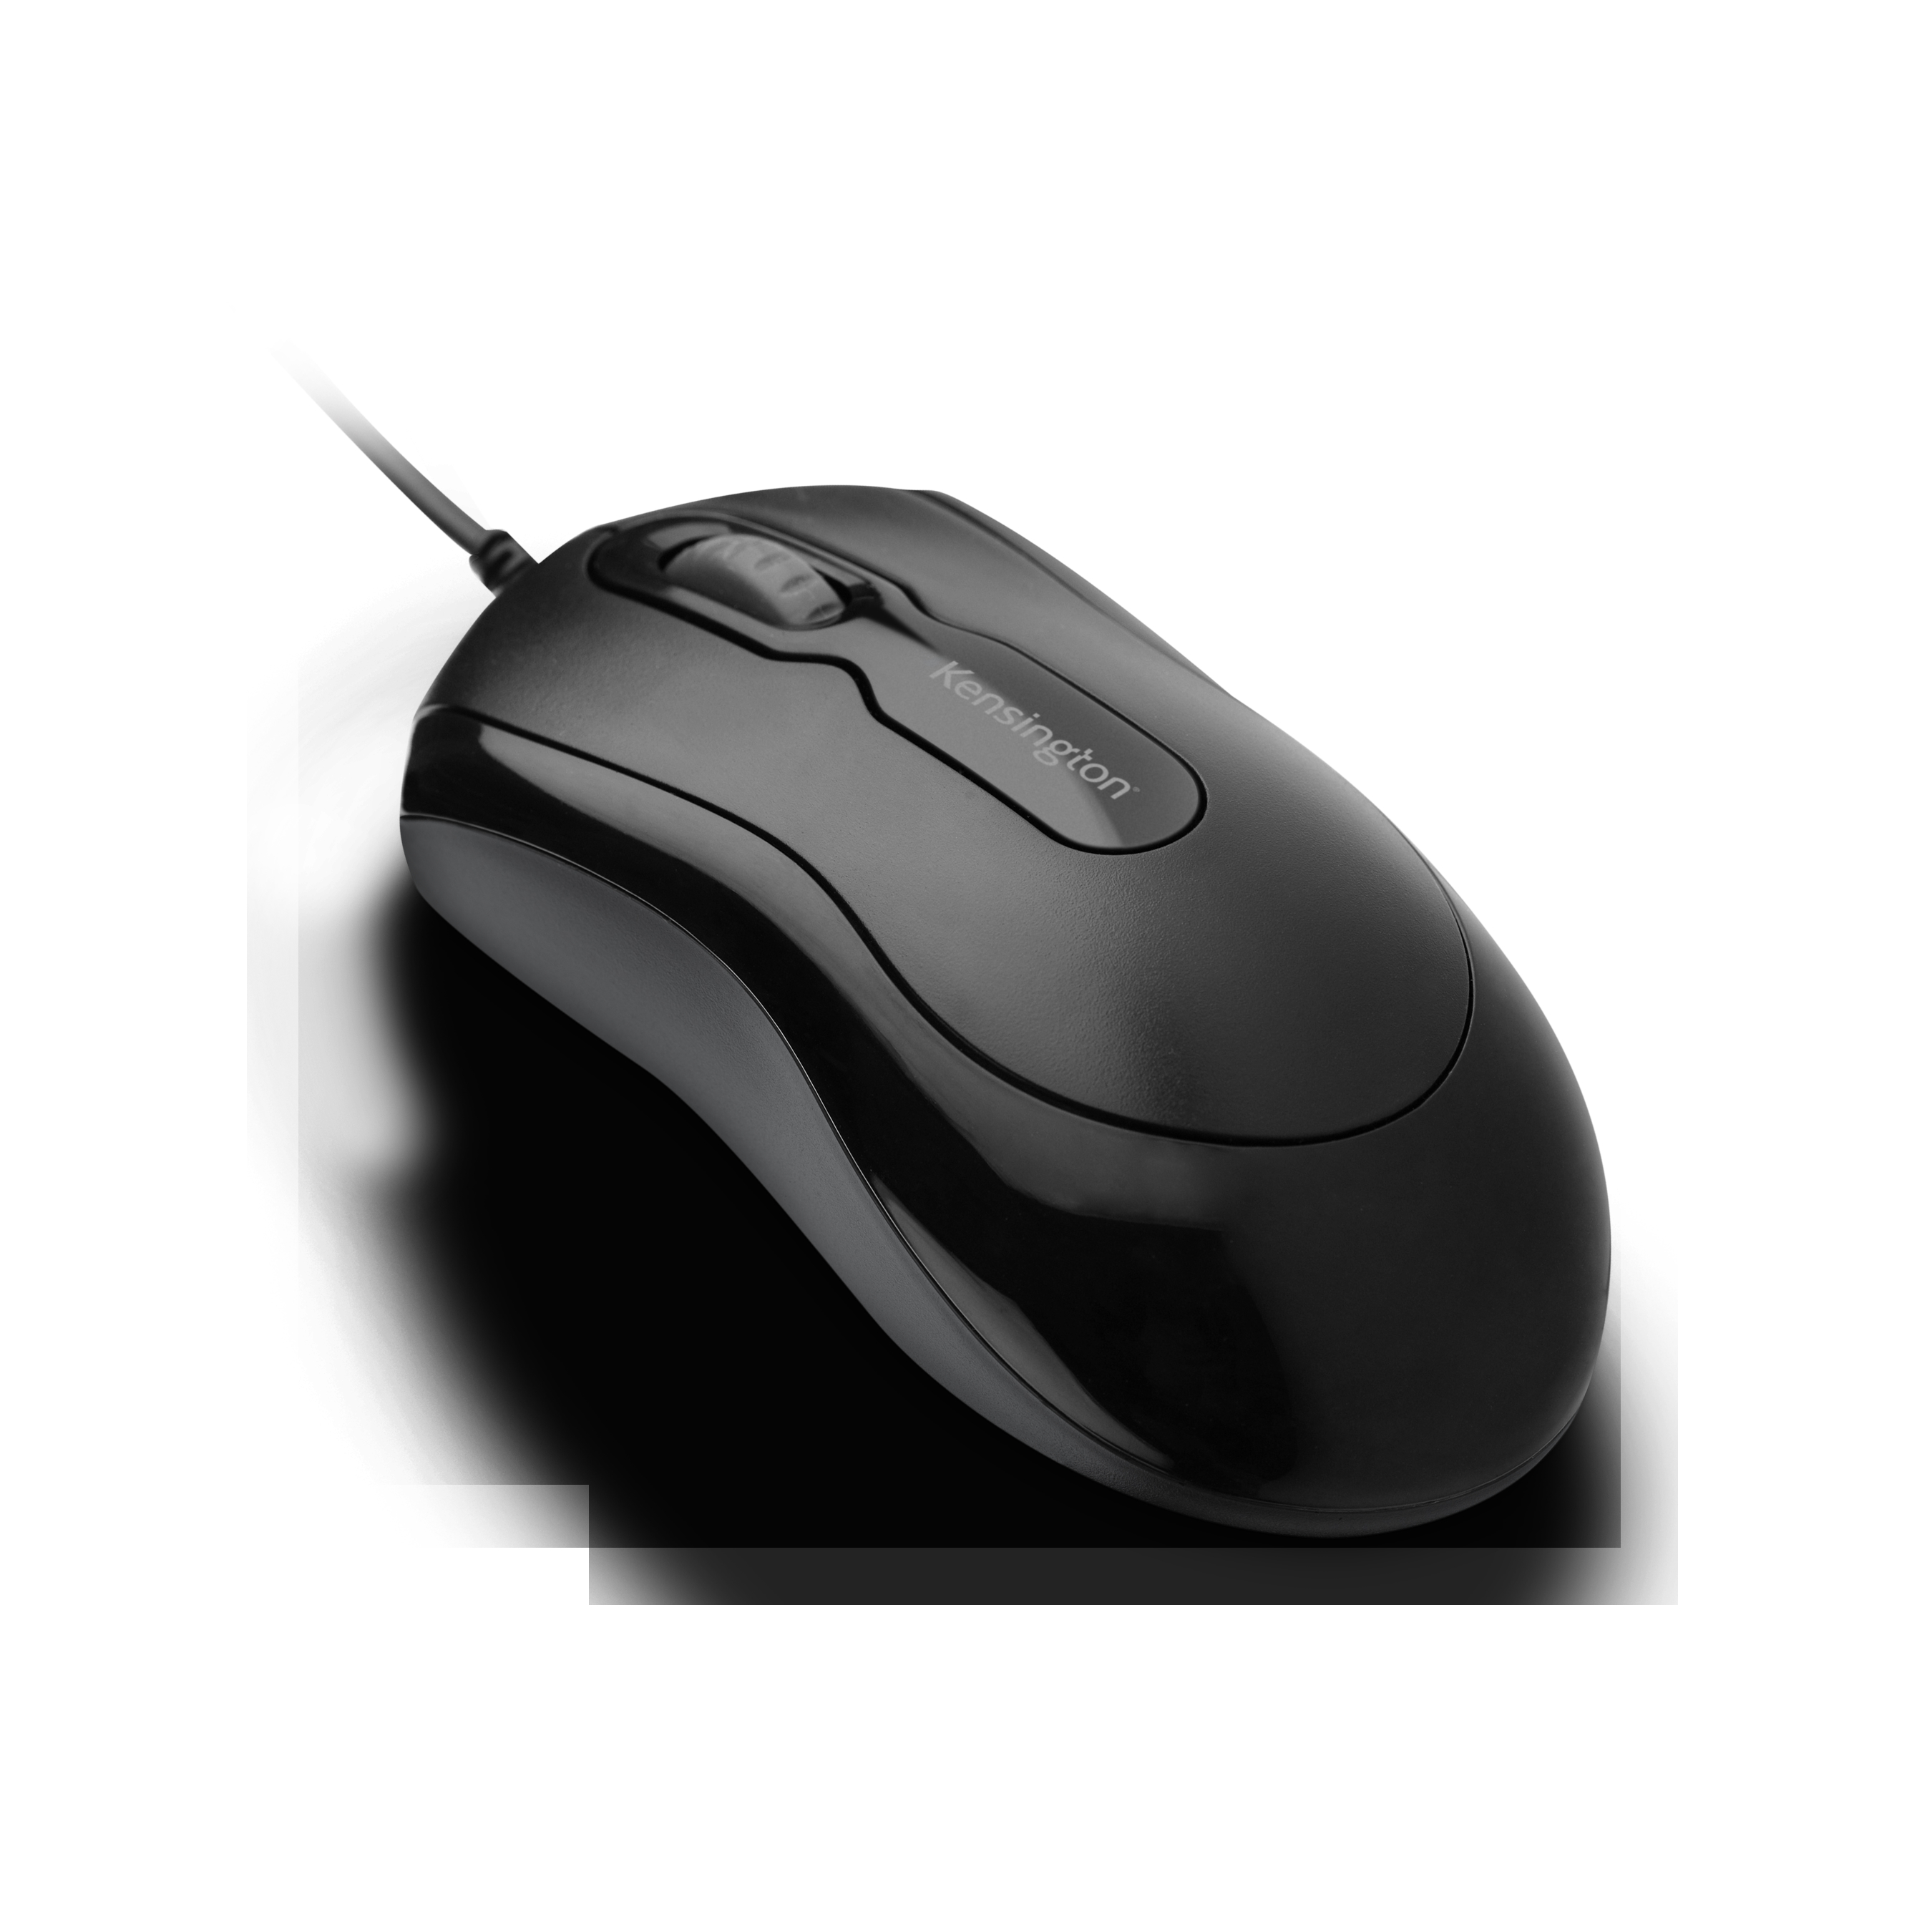 KENSINGTON Mouse-in-a-box K72356EU wired blk